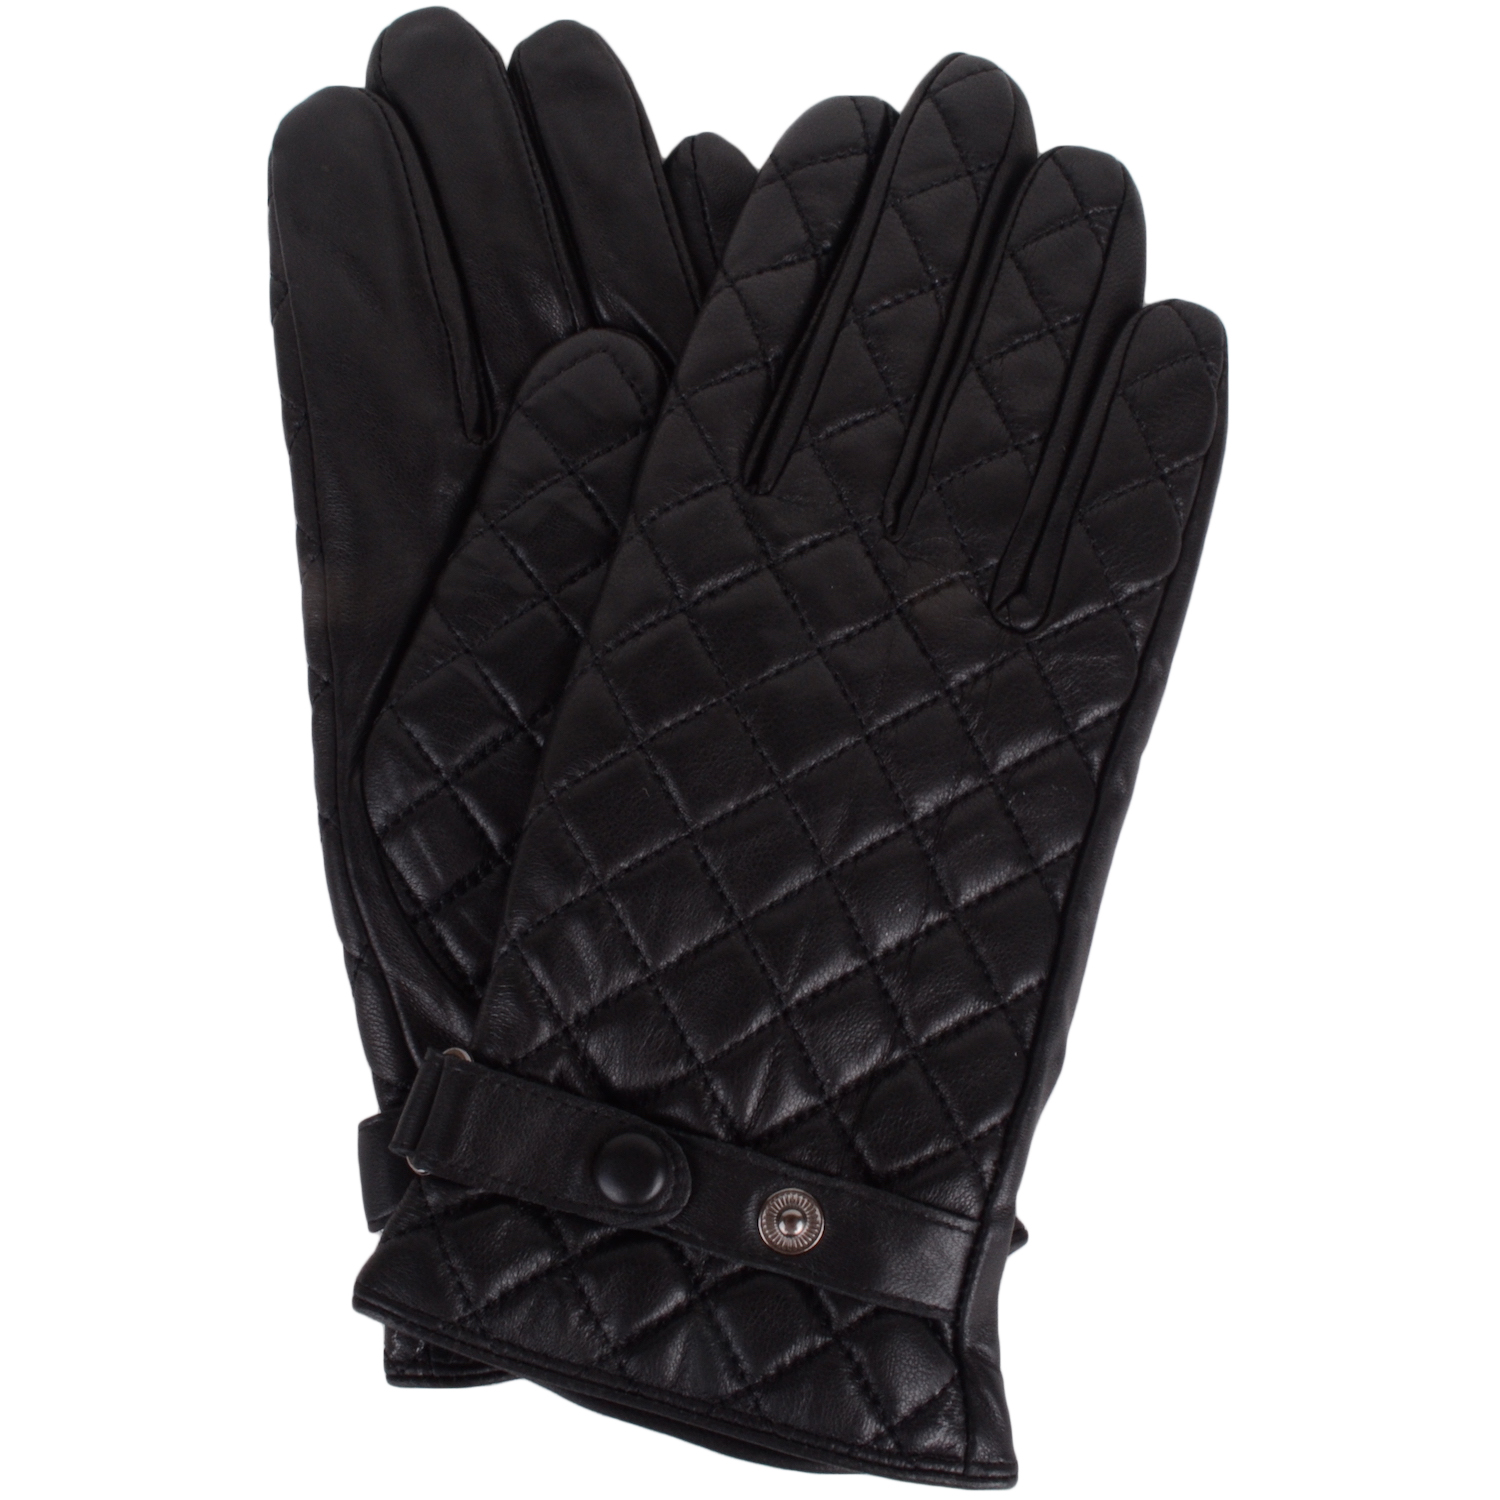 Snugrugs - Ladies Quilted Leather Gloves - Black